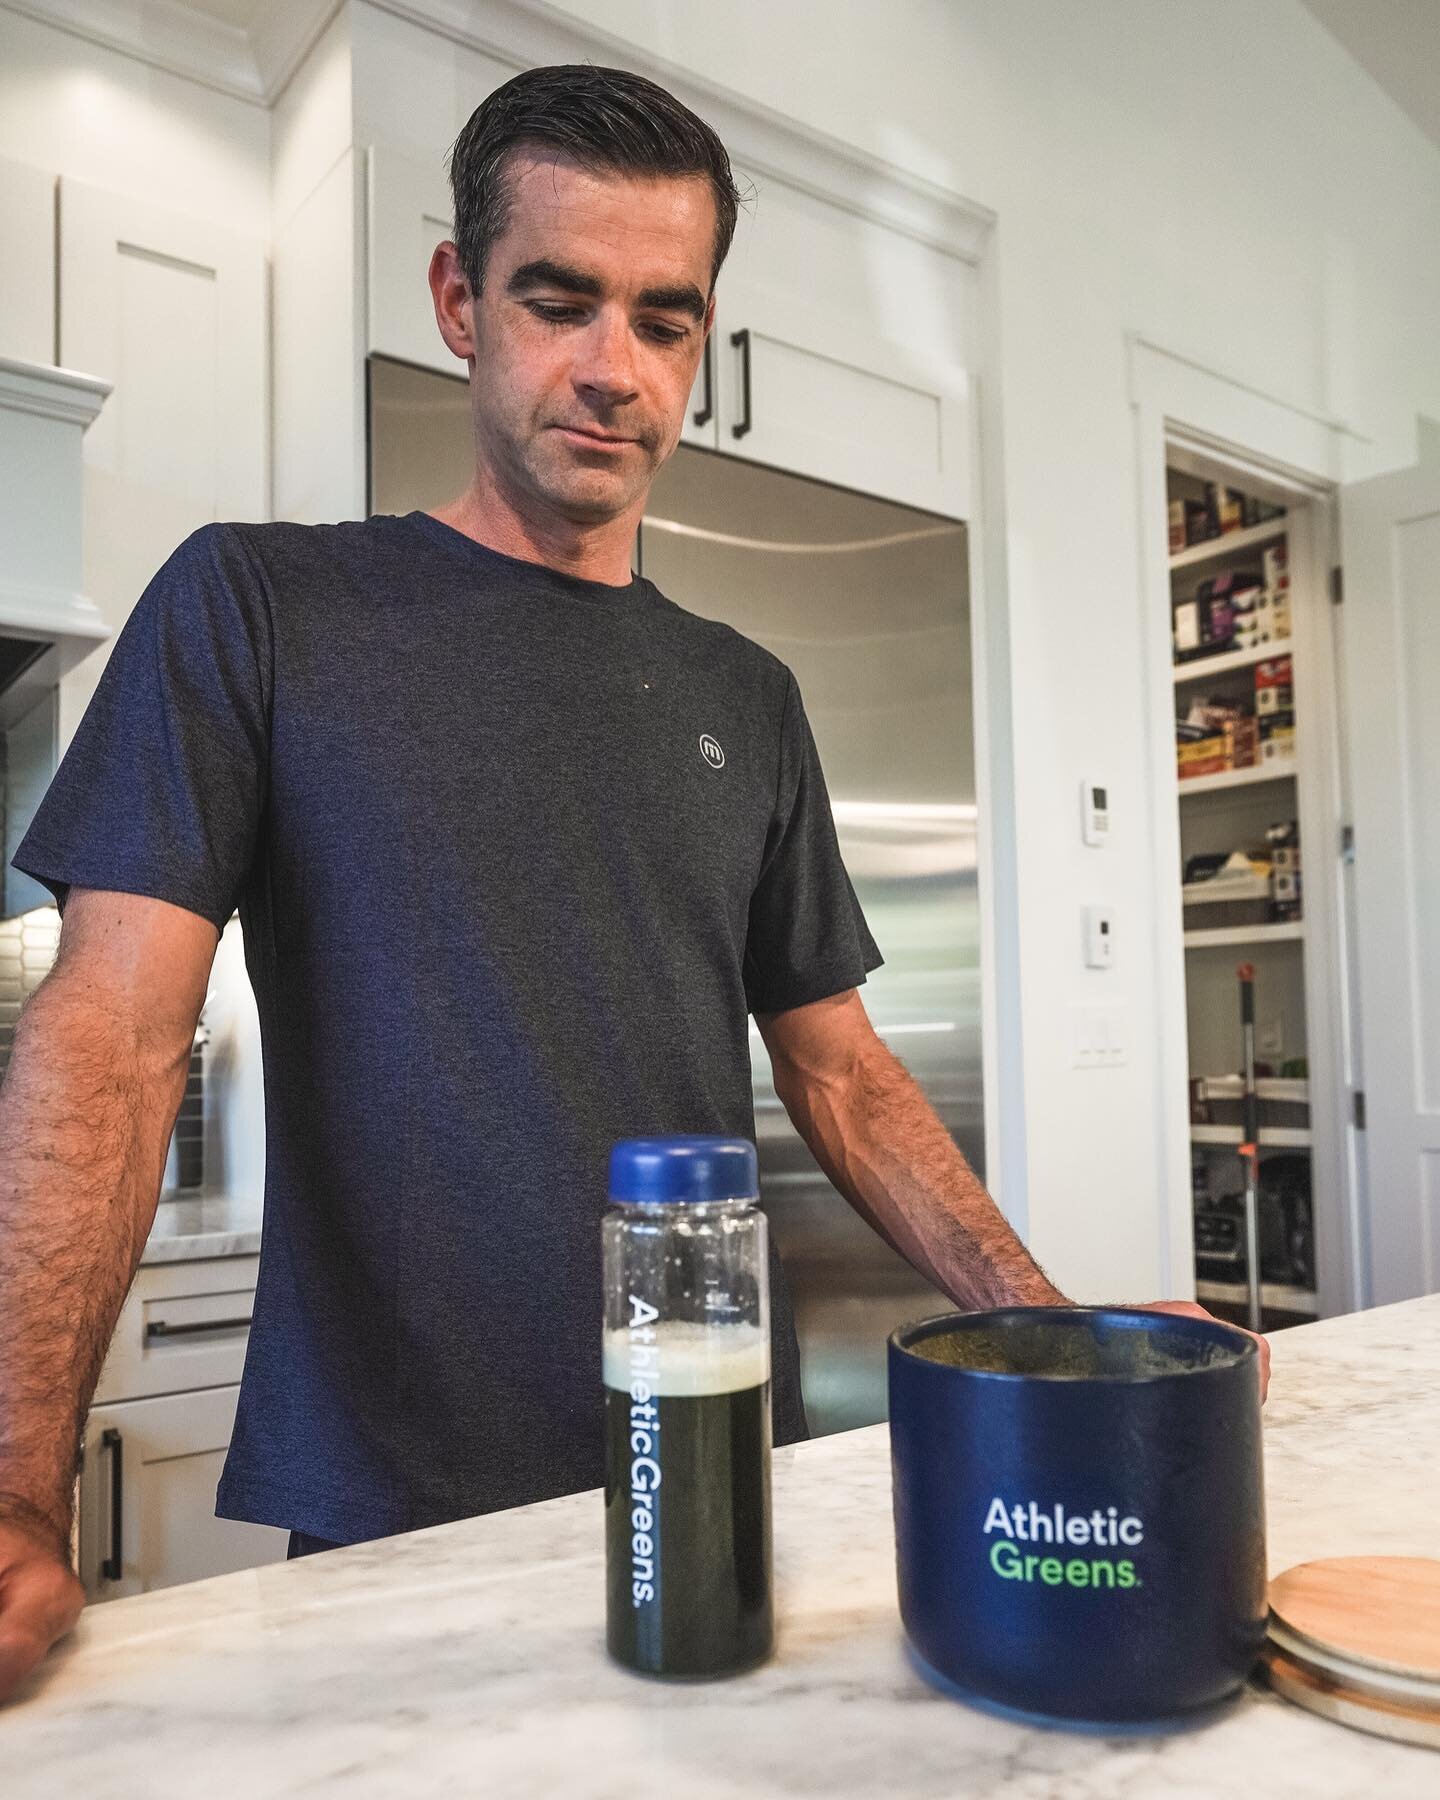 Every morning I have my @athleticgreens and every morning I get perplexed: how do they get so many vitamins, minerals and micronutrients into one scoop?  And how does it actually taste good?! Doesn&rsquo;t make sense.  Mind is blown! 🤯 #morningrouti